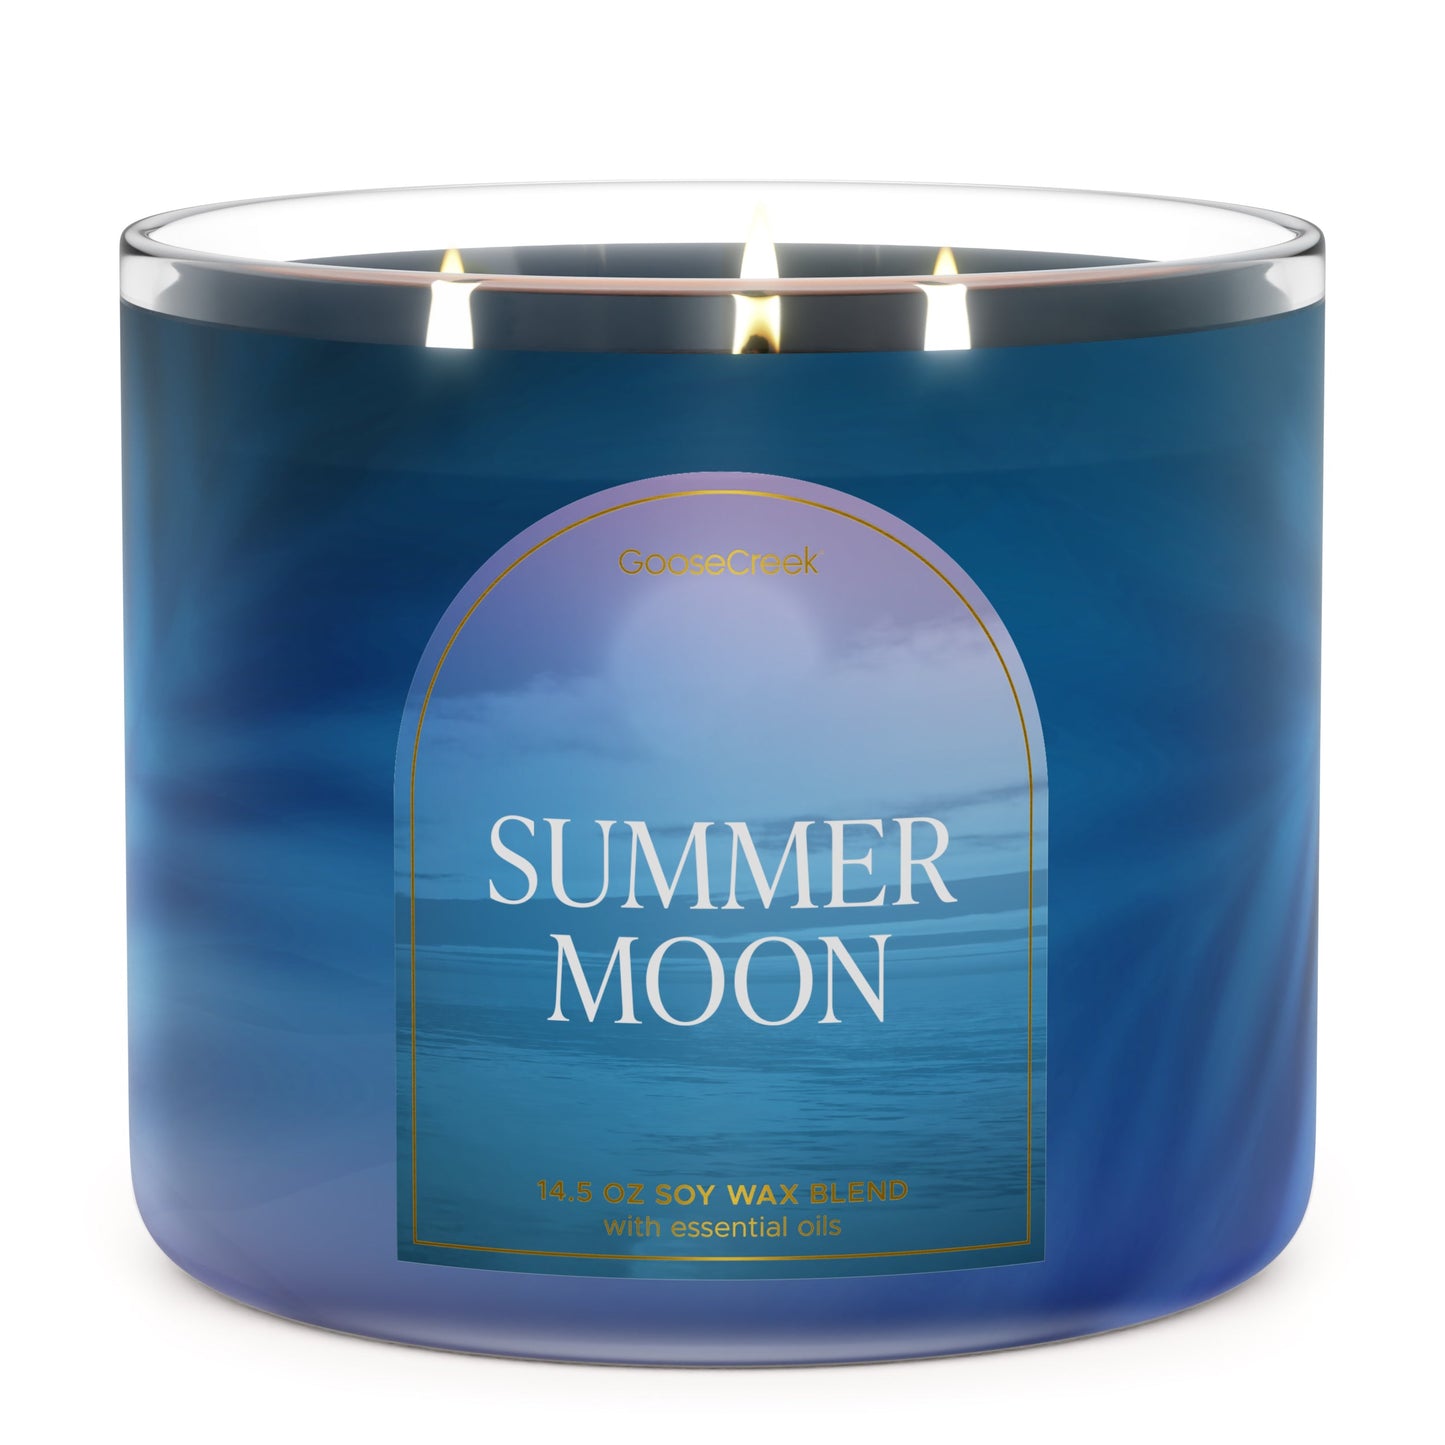 Summer Moon Large 3-Wick Candle